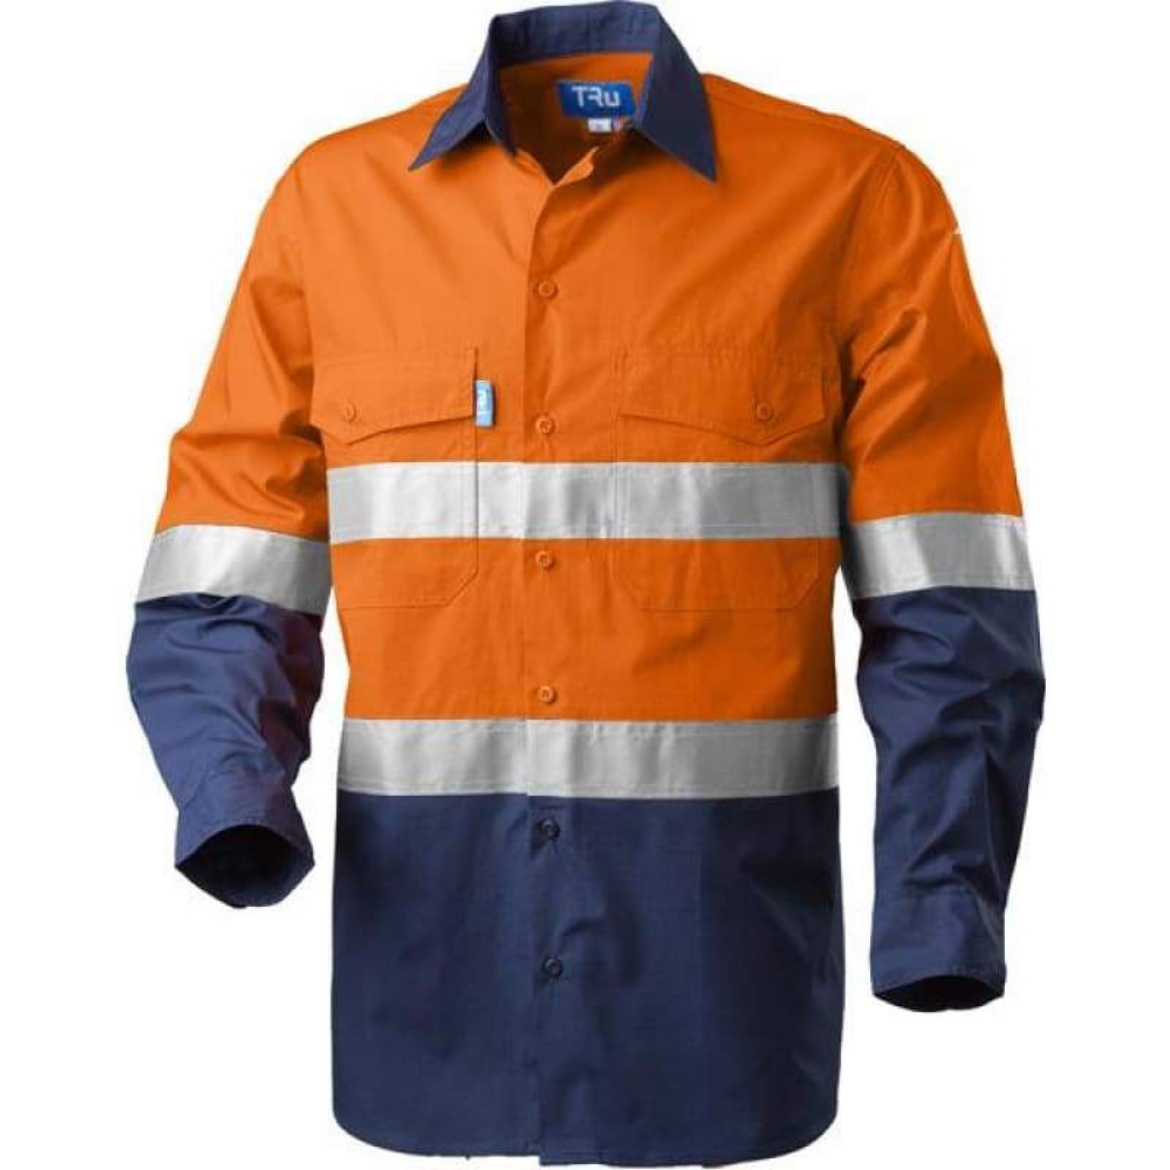 Picture of Tru Workwear, Shirt, Long Sleeve, Cool Ripstop, 3M Tape, H Vents